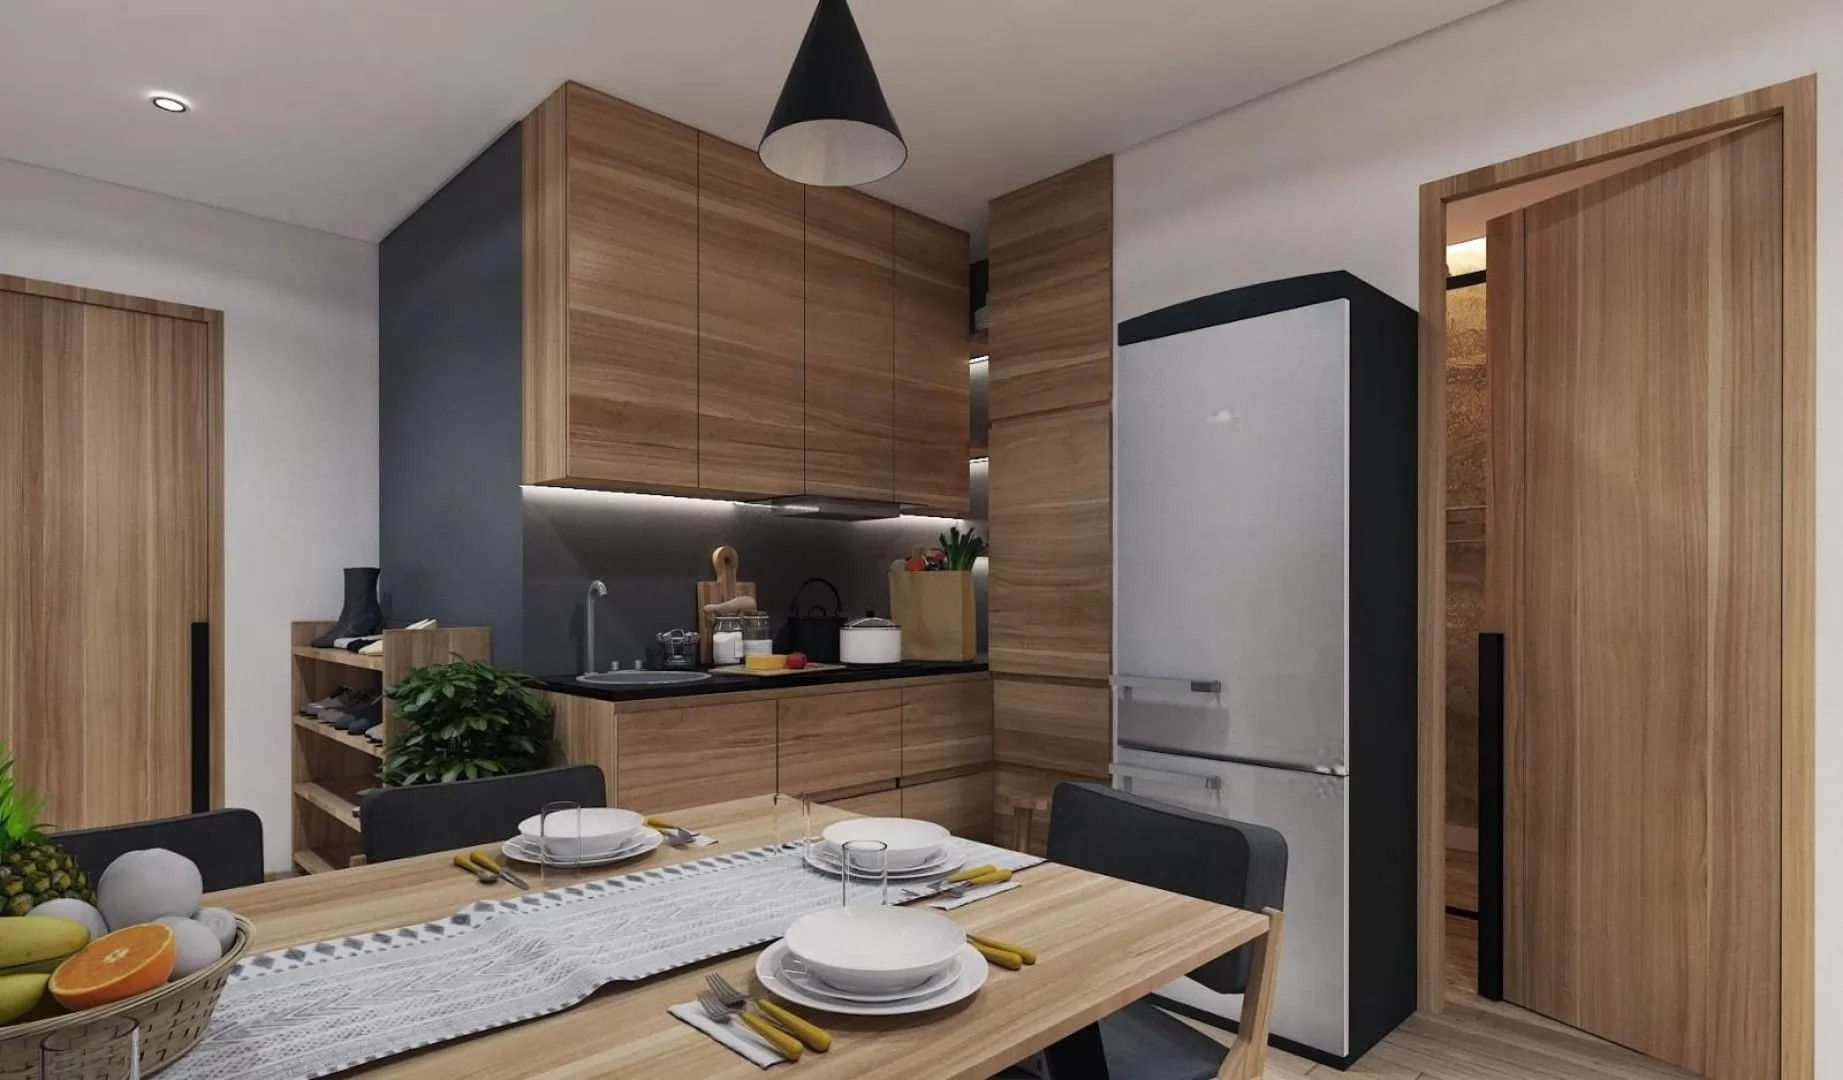 homify Built-in kitchens